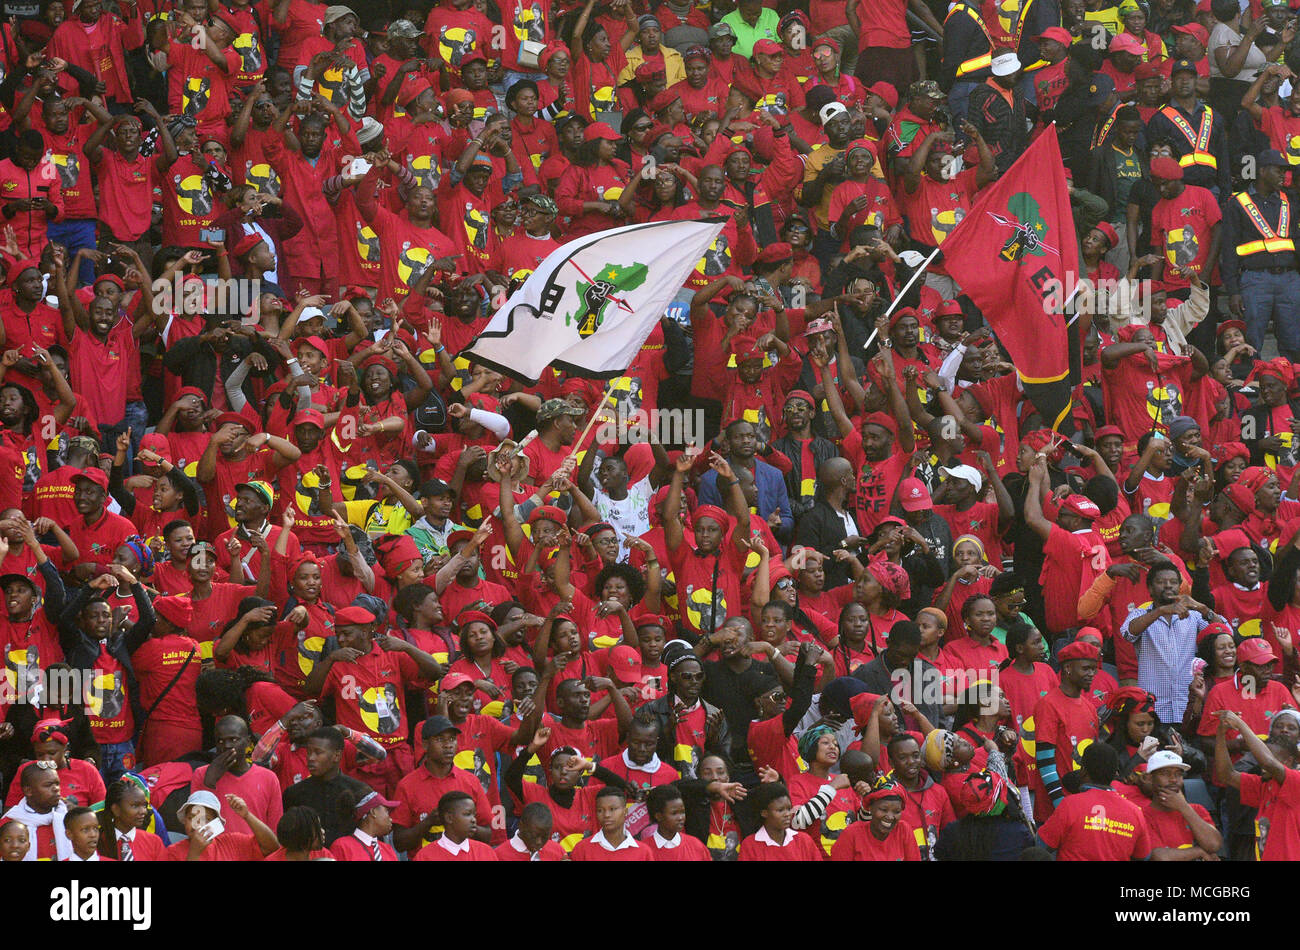 Economic Freedom Fighters (EFF) seen at the funeral of Winnie Mandela at Orlando stadium to pay their last respect. Winnie Mandela, the ex wife of Nelson Mandela passed away in Johannesburg on April 2nd, 2018 after a long illness at the age of 81, the funeral has been celebrated to keep non-racial South Africa dream in people’s mind. Stock Photo